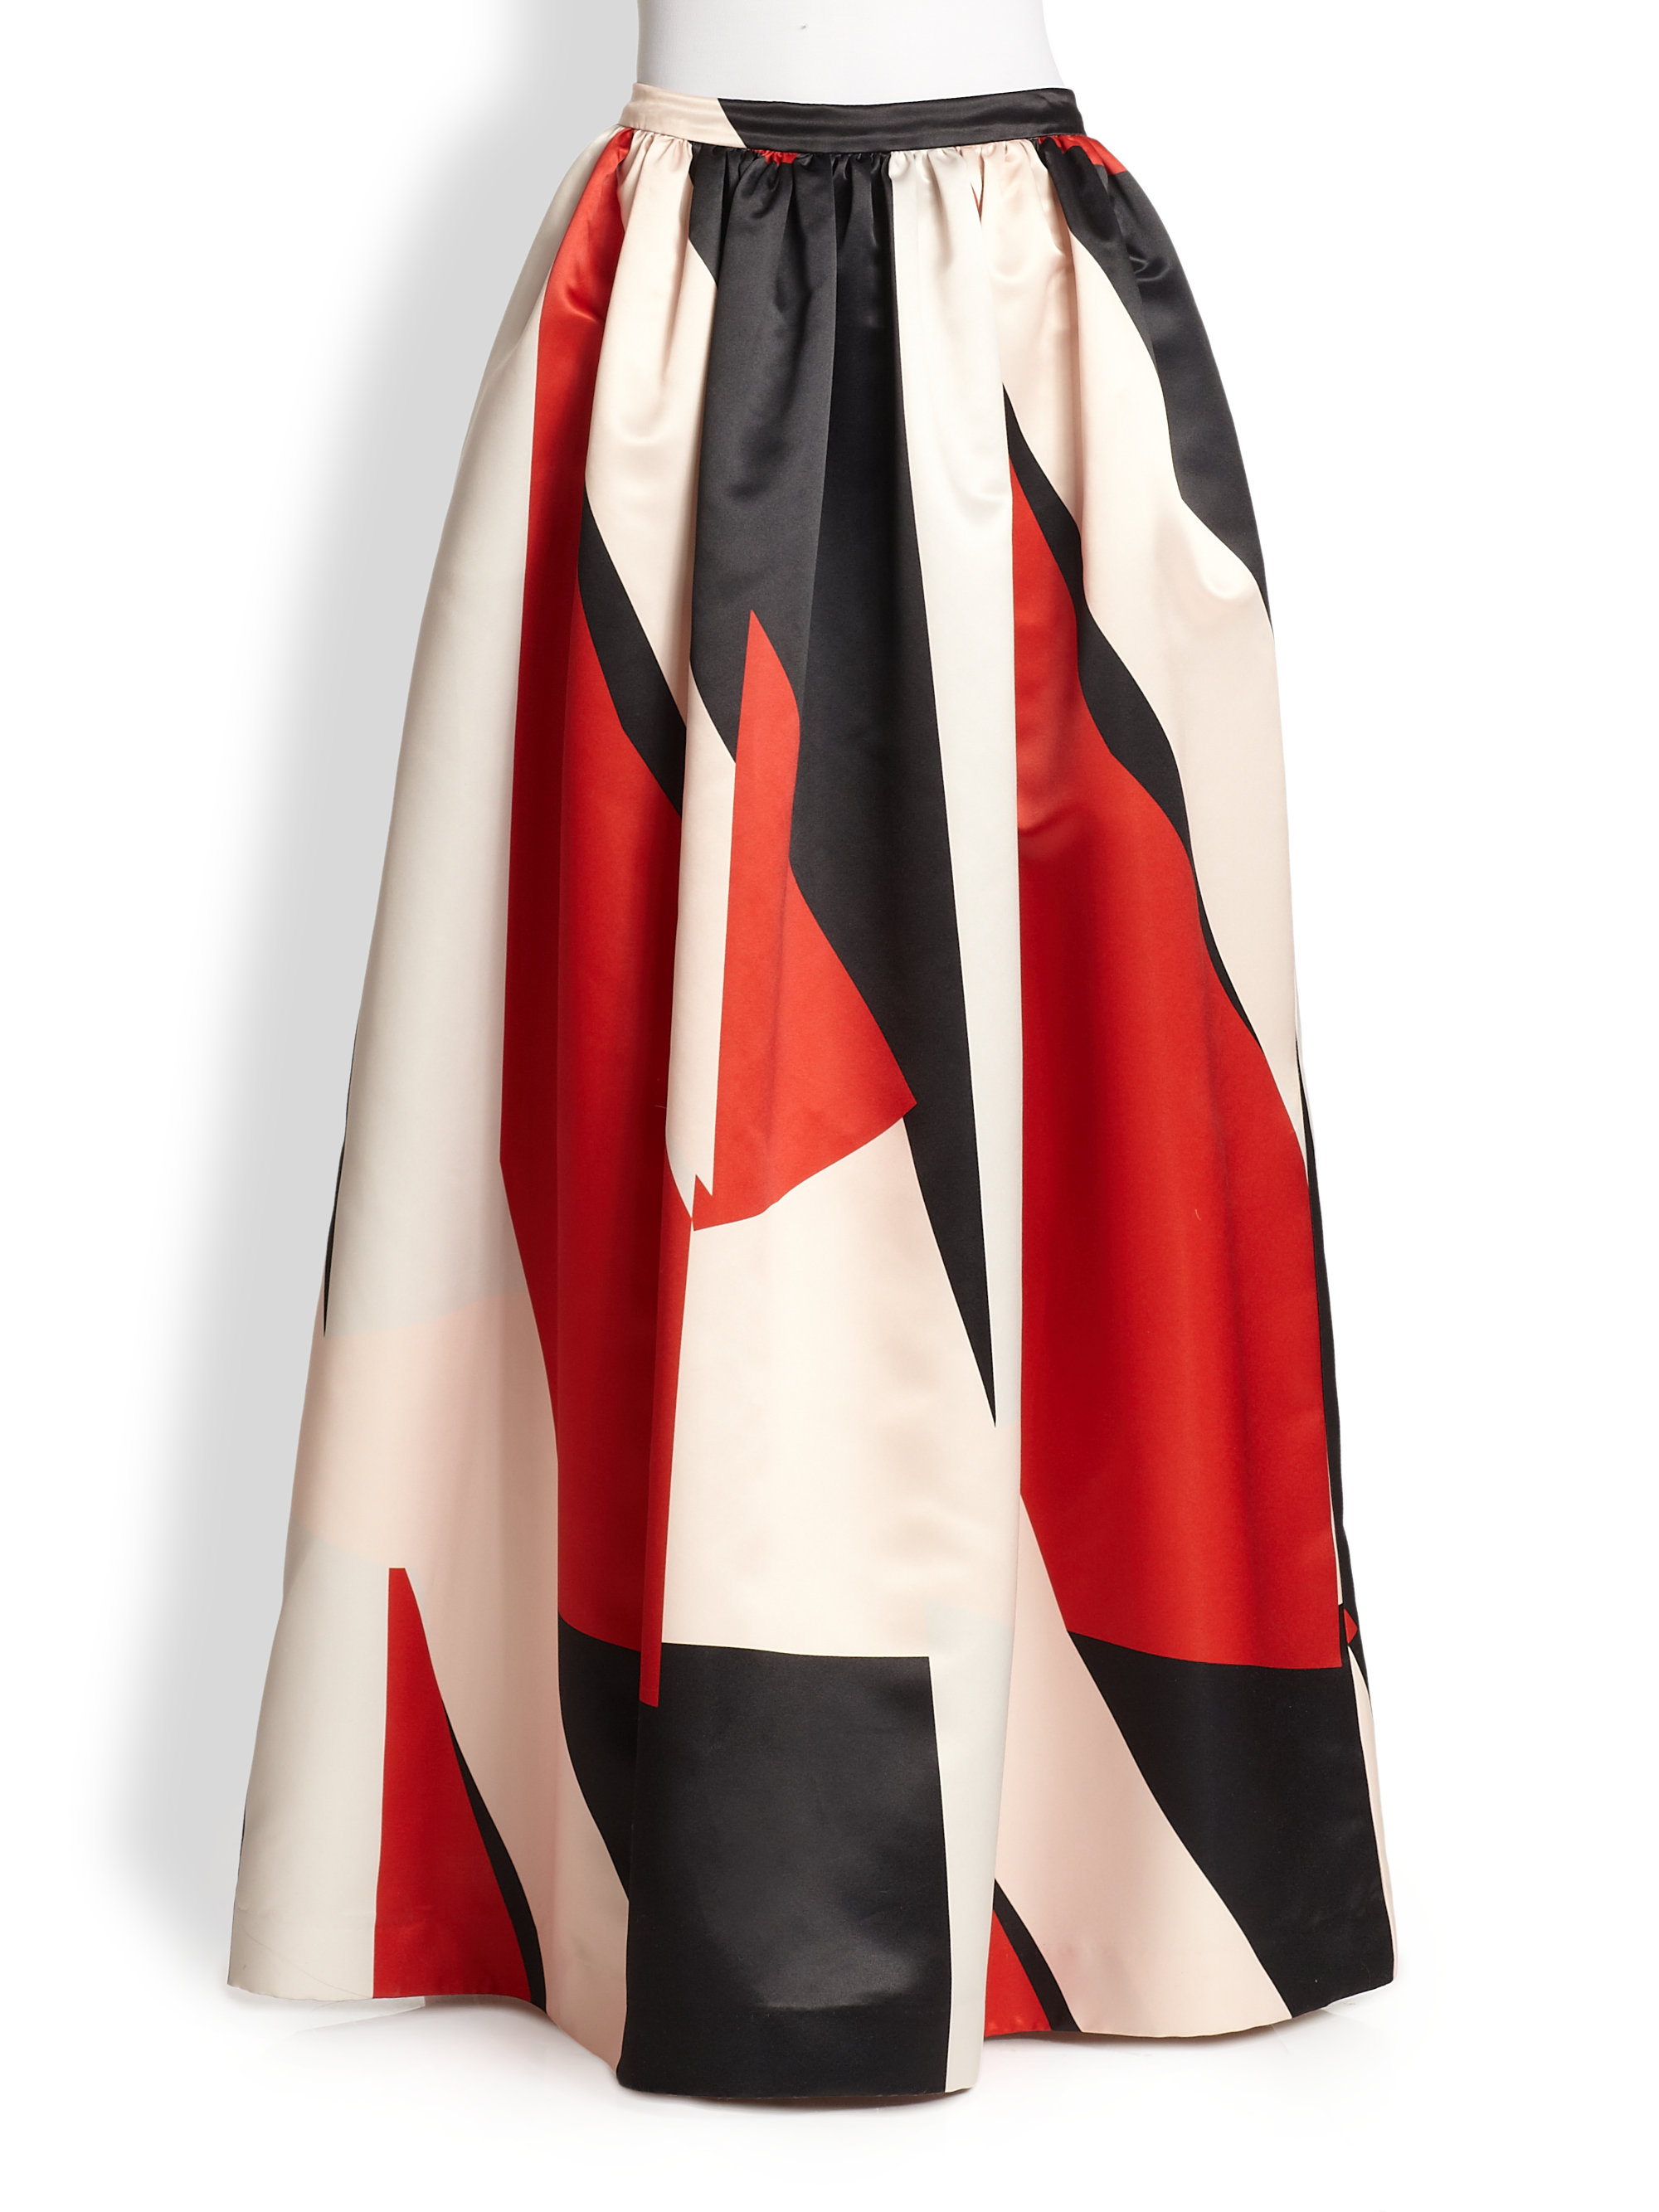 Alice   olivia Abella Long Flared Skirt in Red | Lyst